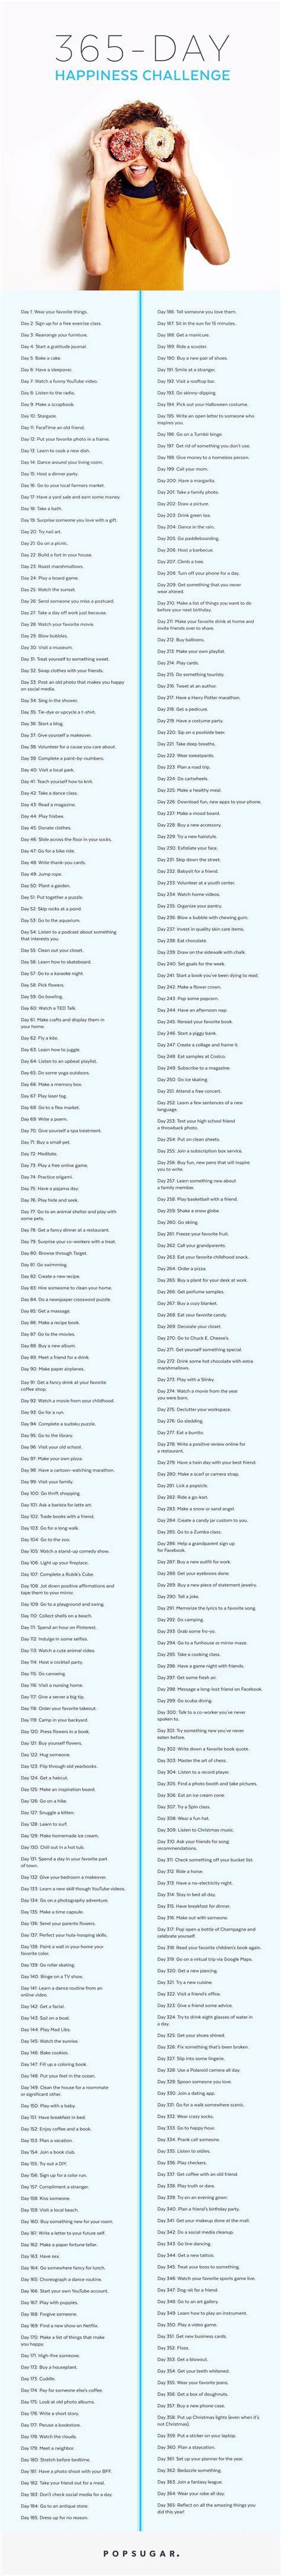 The 365 Day Happiness Challenge Guaranteed To Change Your Life